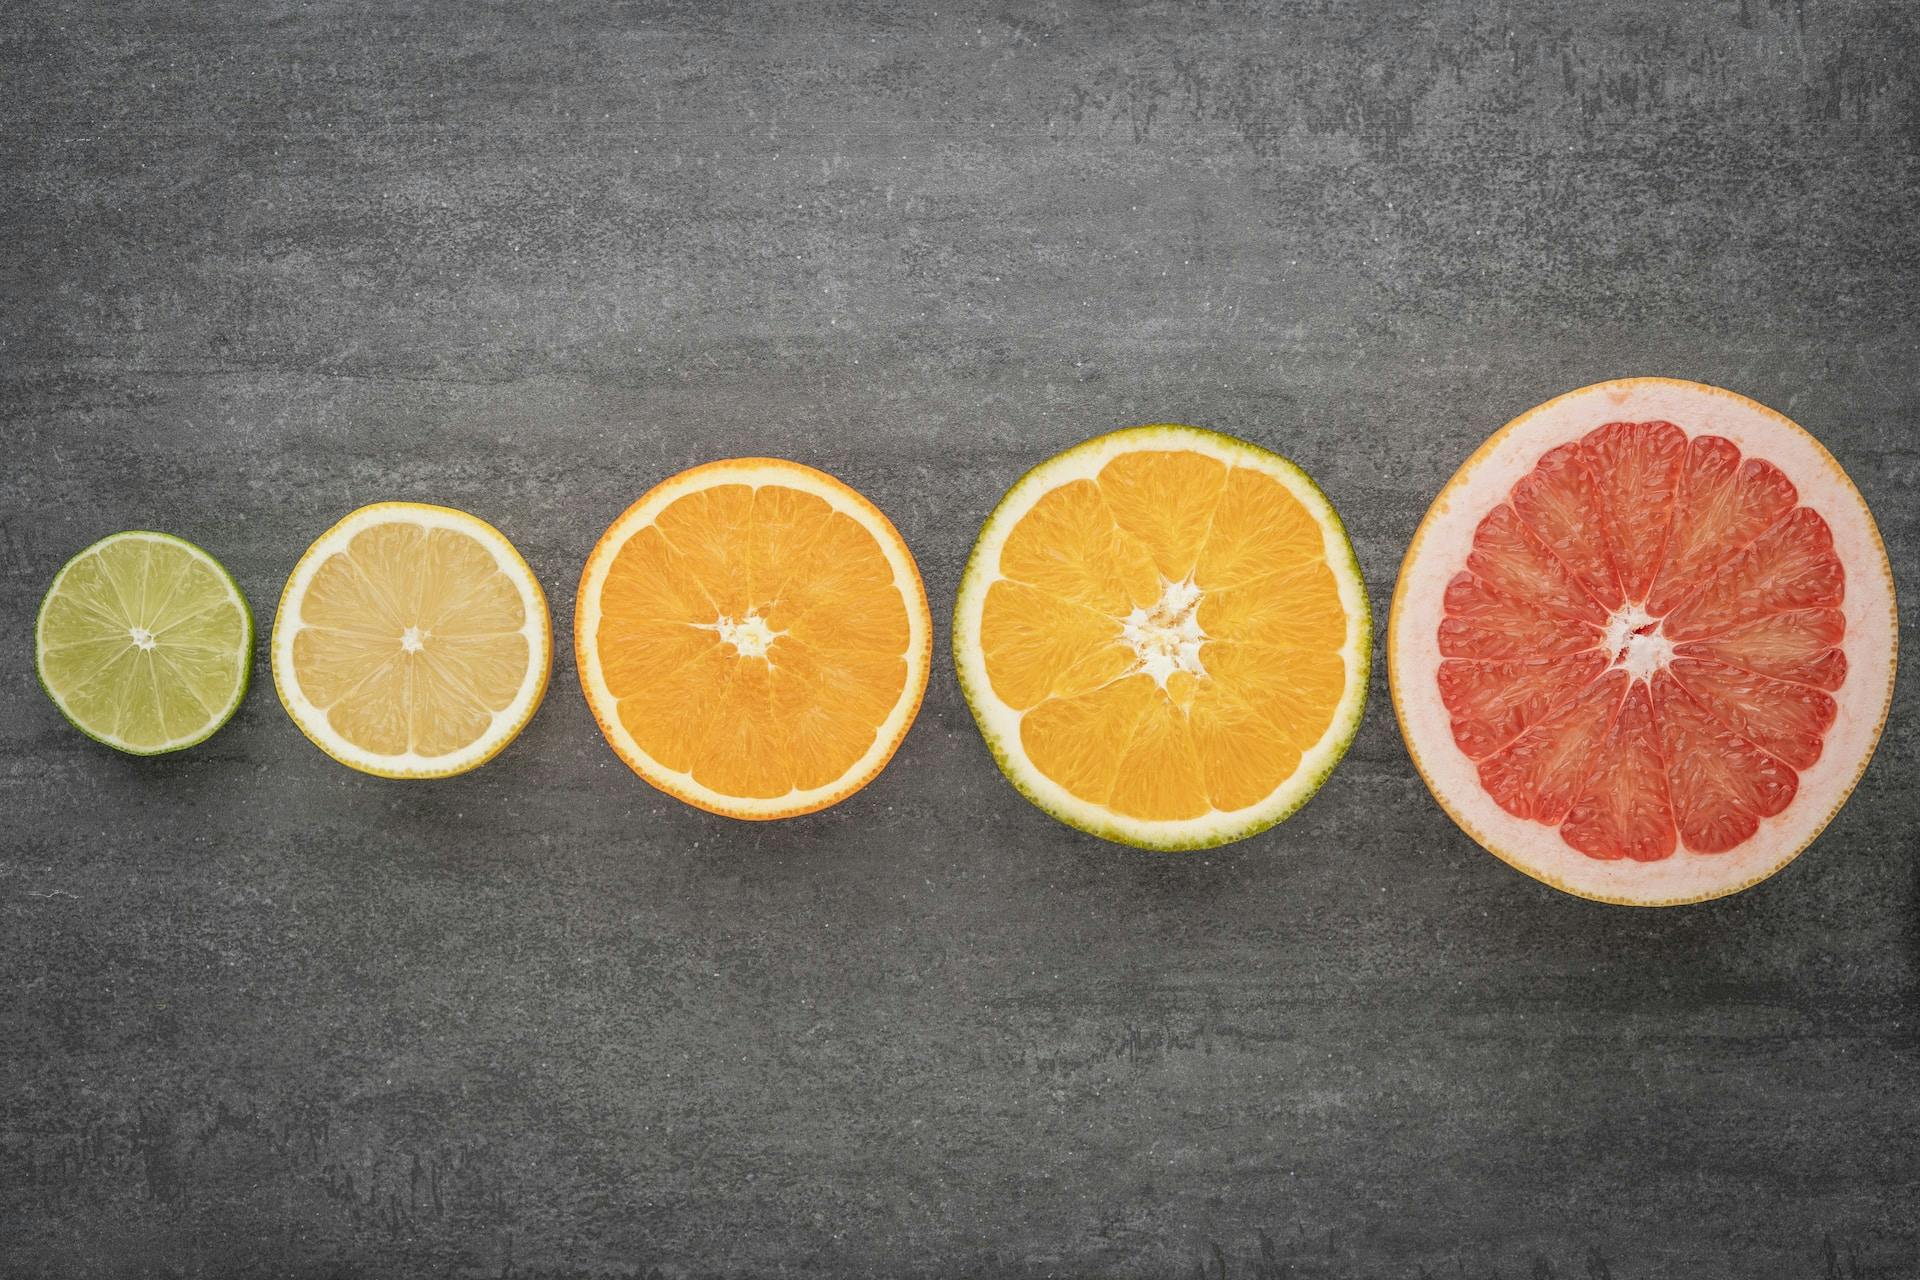 Multiple different types of citrus fruit in a horizontal line